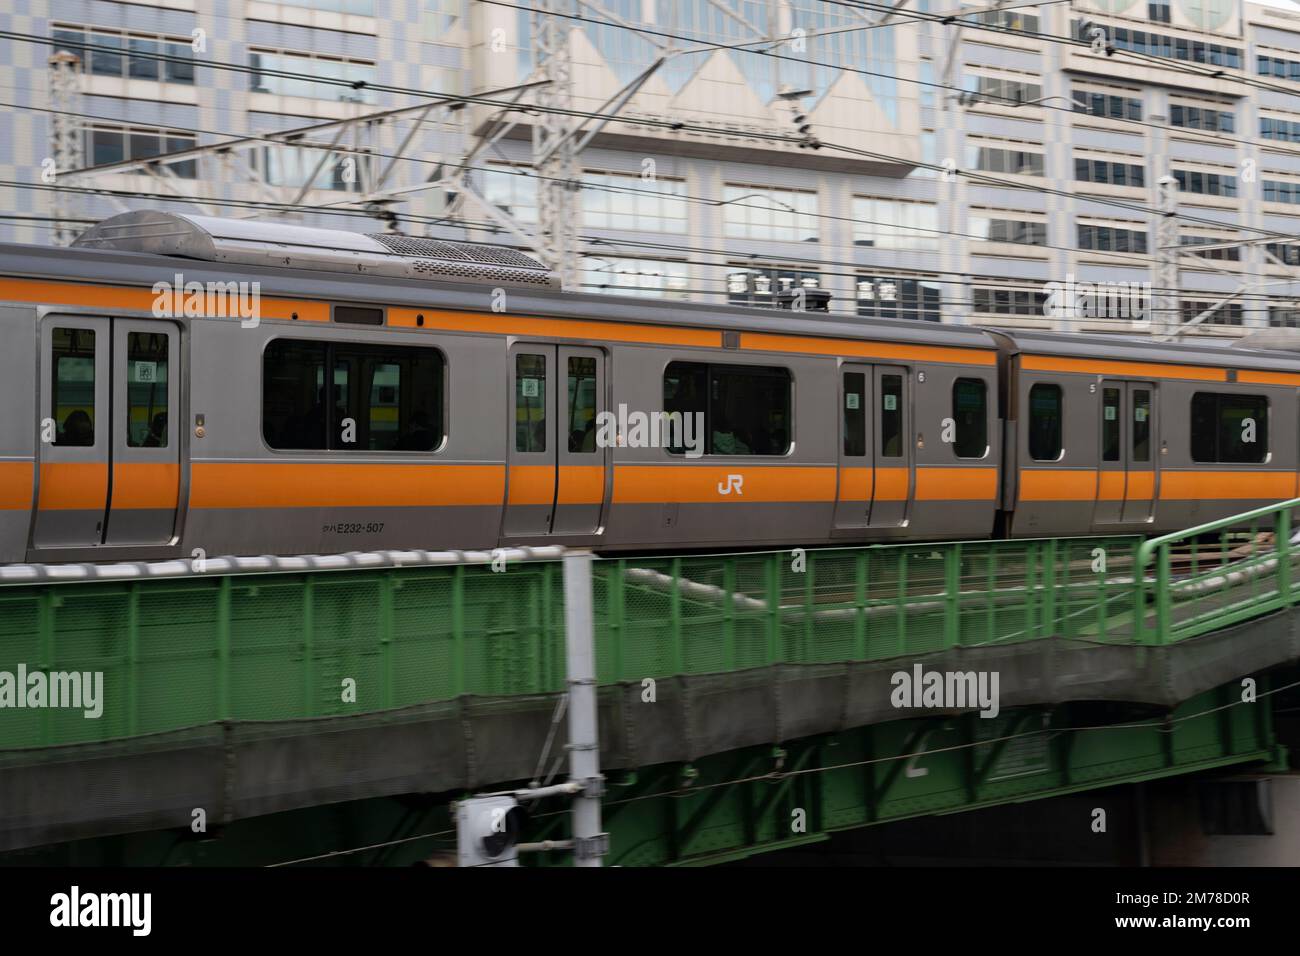 Tokyo, Japan. 6th Jan, 2023. A Chuo Line Rapid train at JR Sudiobashi Station.The JR East Chuo Line is a railway line in Japan operated by East Japan Railway Company (JR East). It runs from Tokyo Station in central Tokyo to Takao Station in the west, passing through major cities such as Yokohama, Hachioji, and Ome. The Chuo Line is colored orange on JR East train maps and is known for its rapid service, with trains reaching speeds of up to 130 km/h. It is used by commuters and tourists for travel to popular destinations such as Mount Takao, the Tama area, and the Fuji Five Lakes region. Th Stock Photo